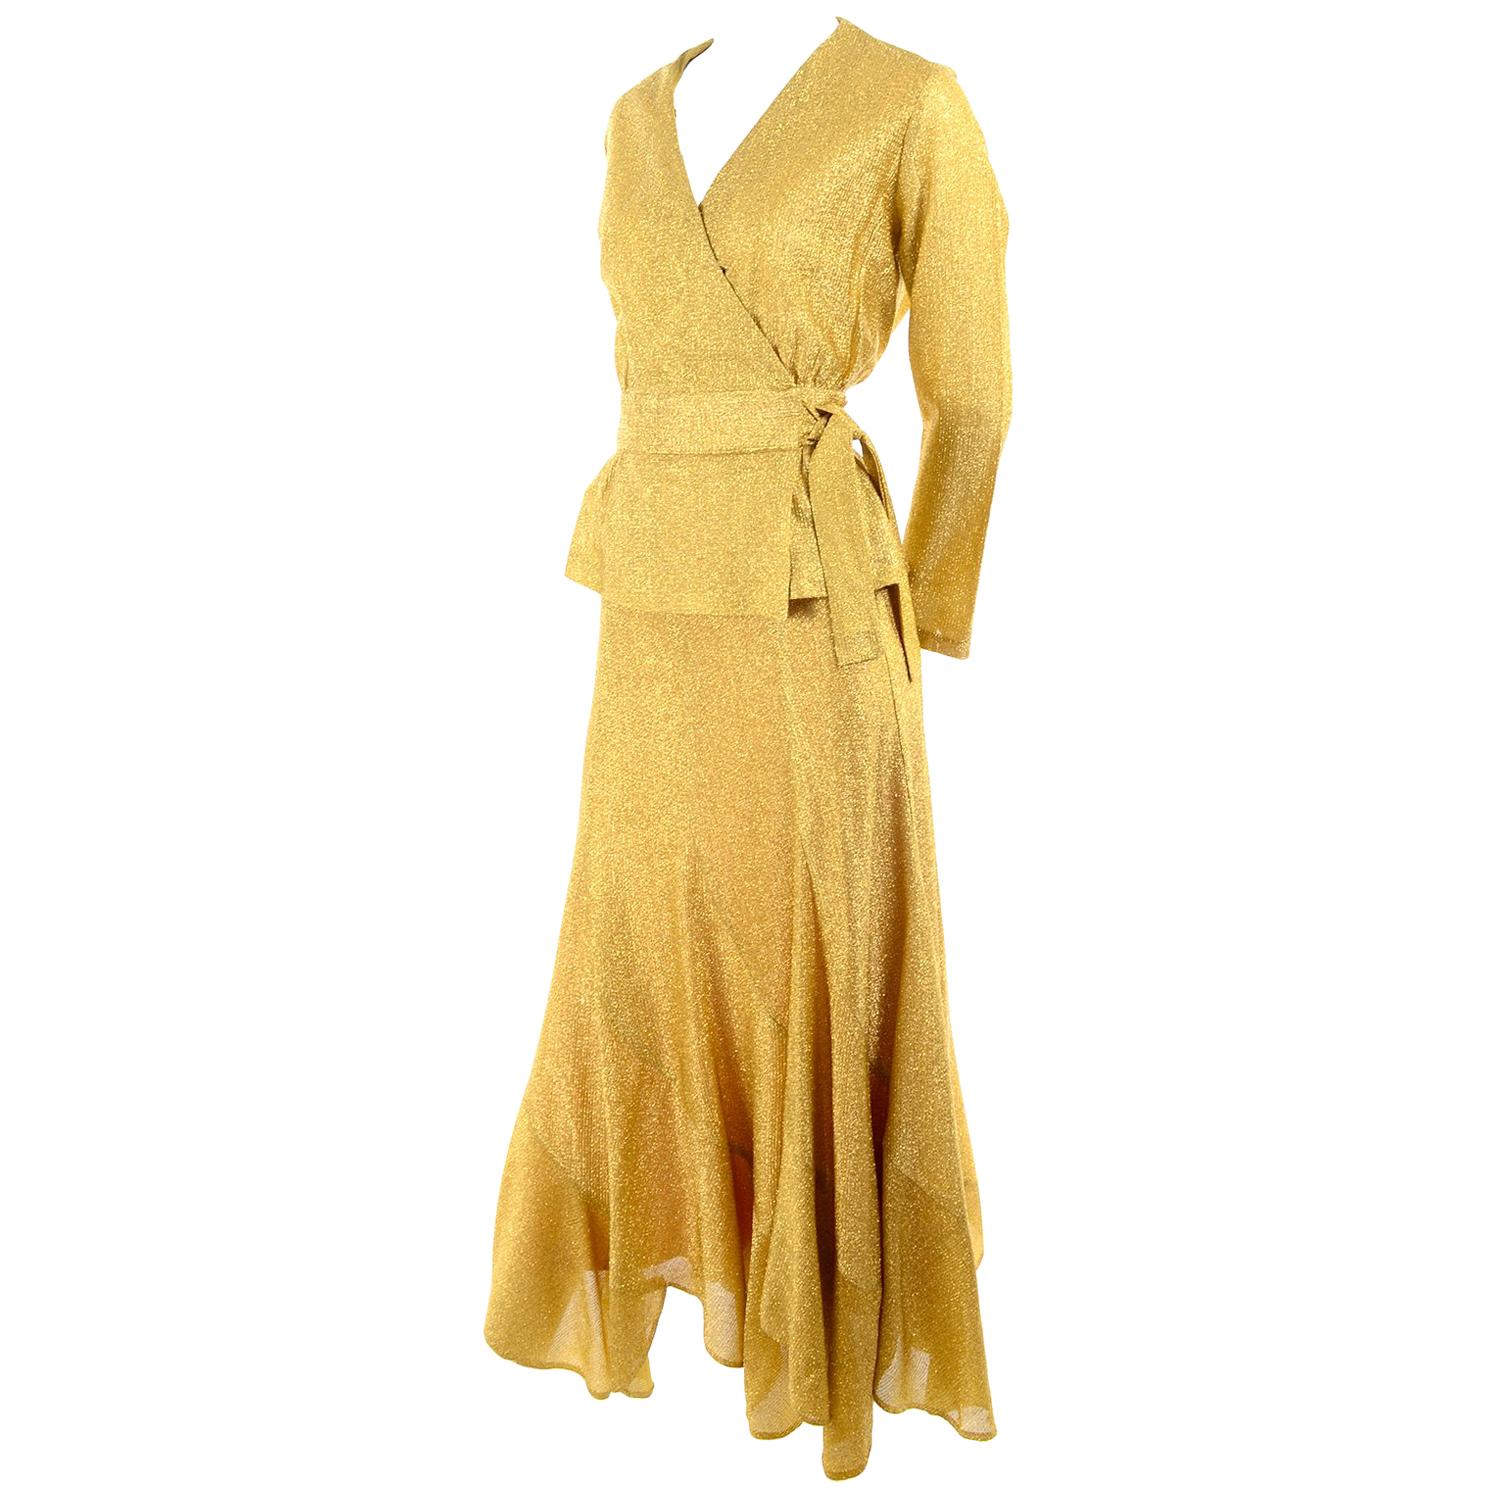 Beverly Paige Gold Lurex Evening Dress 2 pc With Long Bias Cut Skirt, 1970s